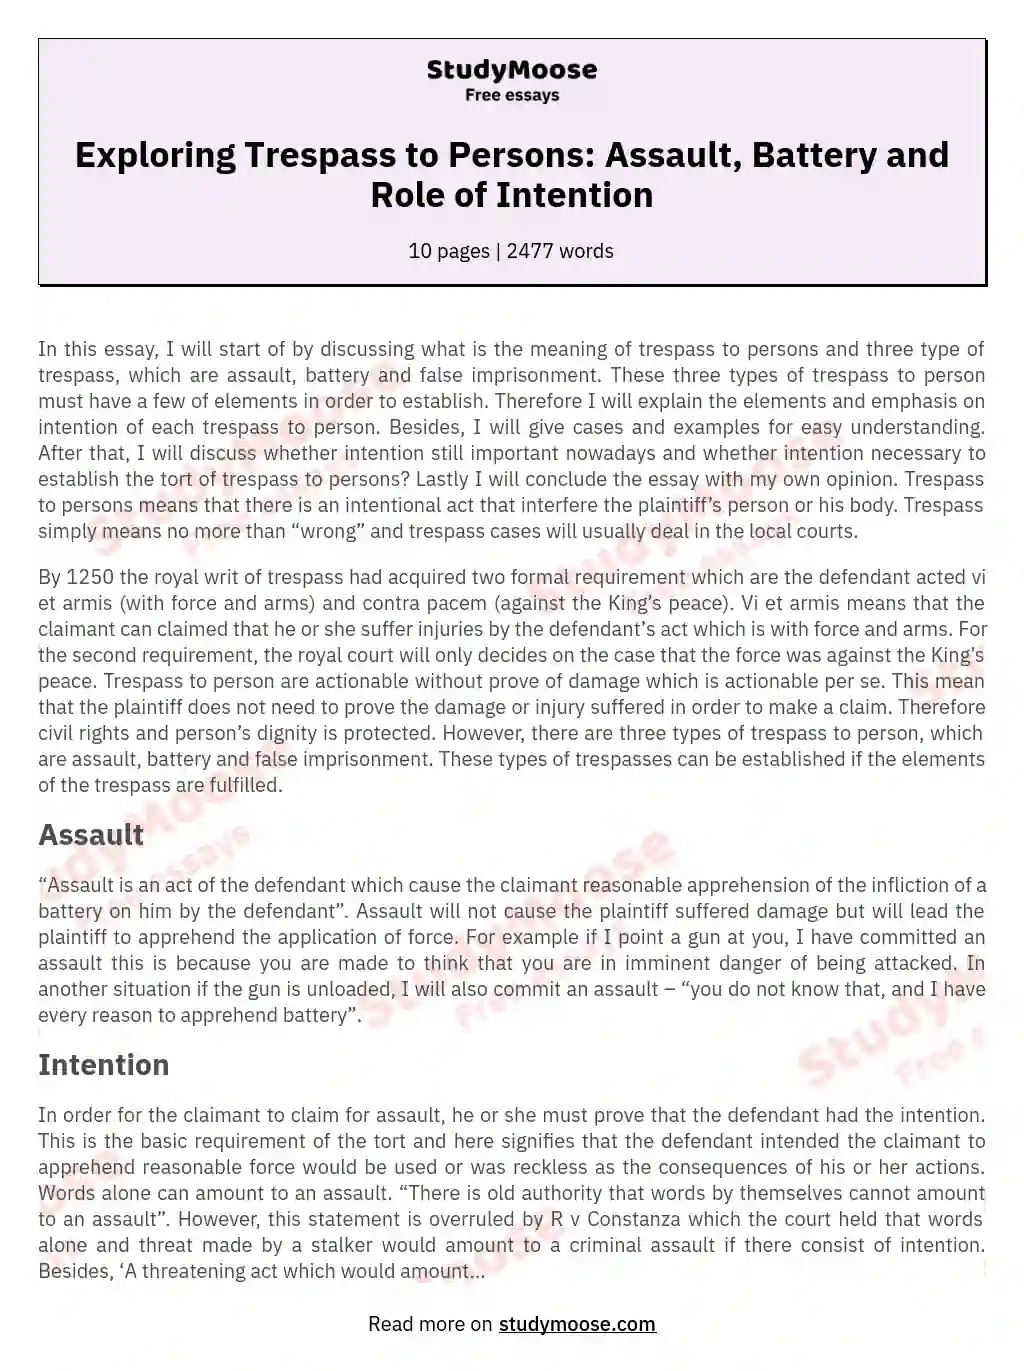 Exploring Trespass to Persons: Assault, Battery and Role of Intention essay